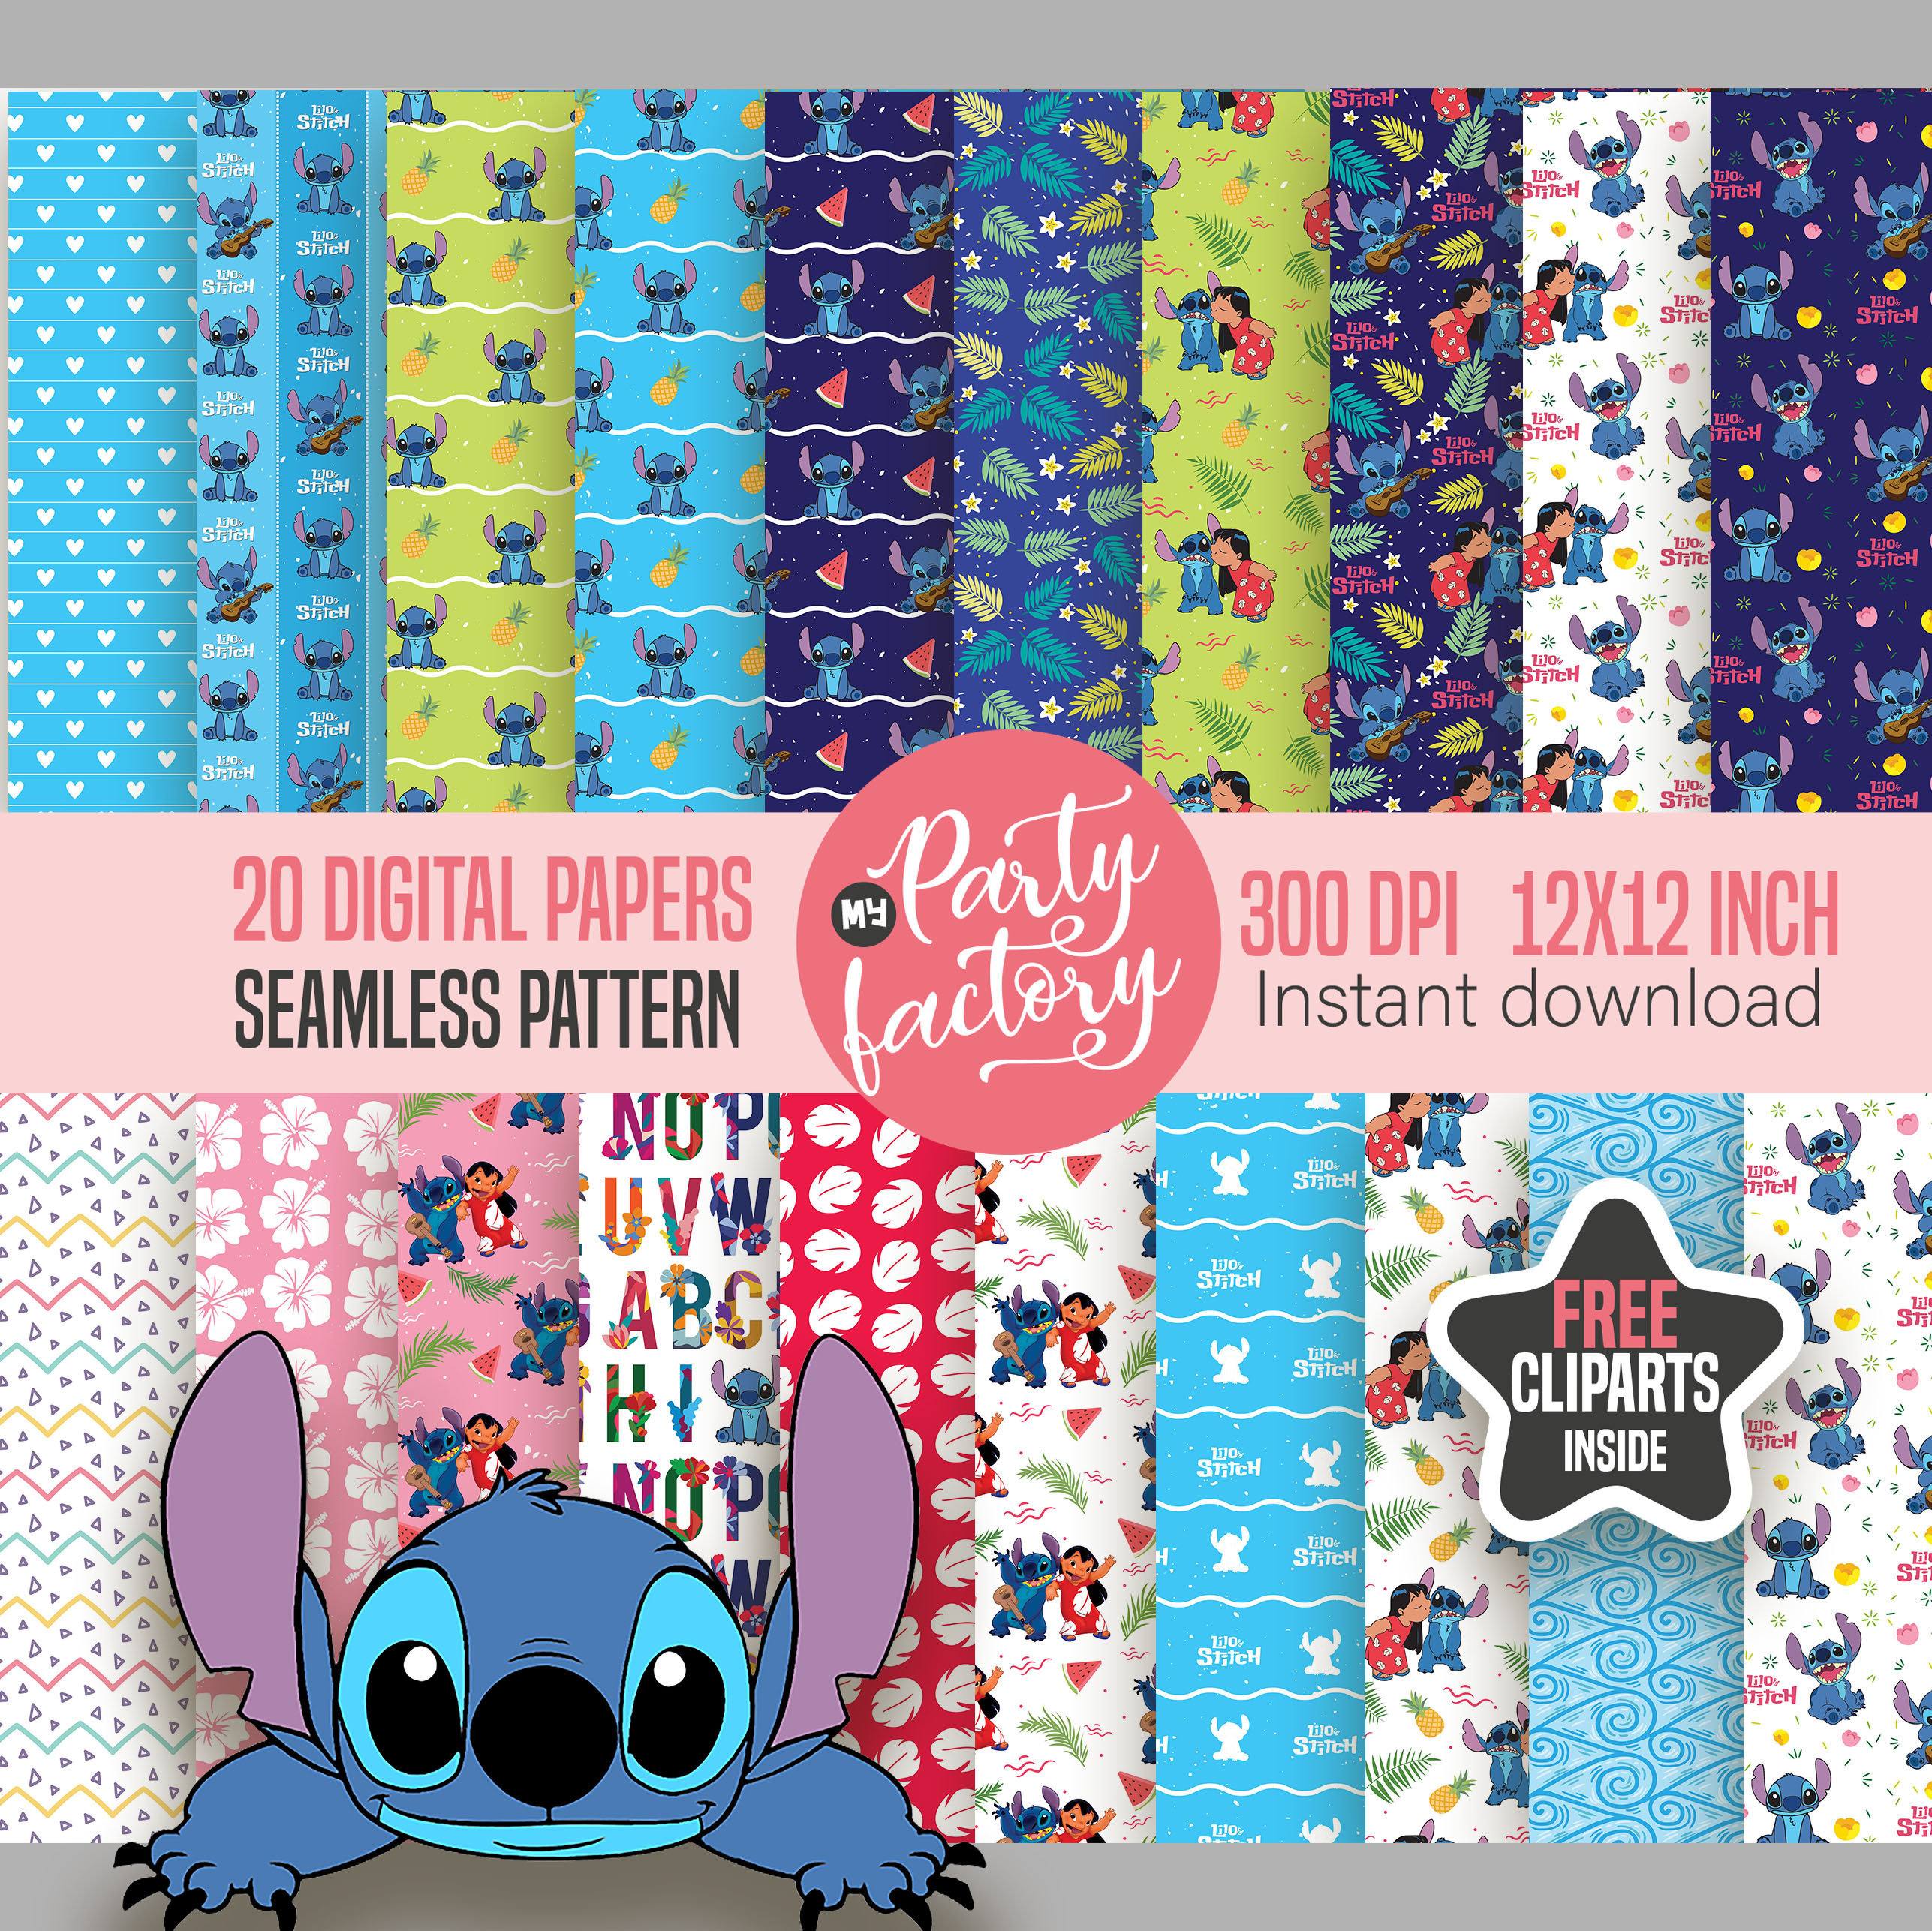 Lilo Stitch 20 Digital Paper & Free PNG Clipart Included, Free Pgn Clipart,  Lilo Stitch Ohana, Scrapbook Papers Digital Instant Download 